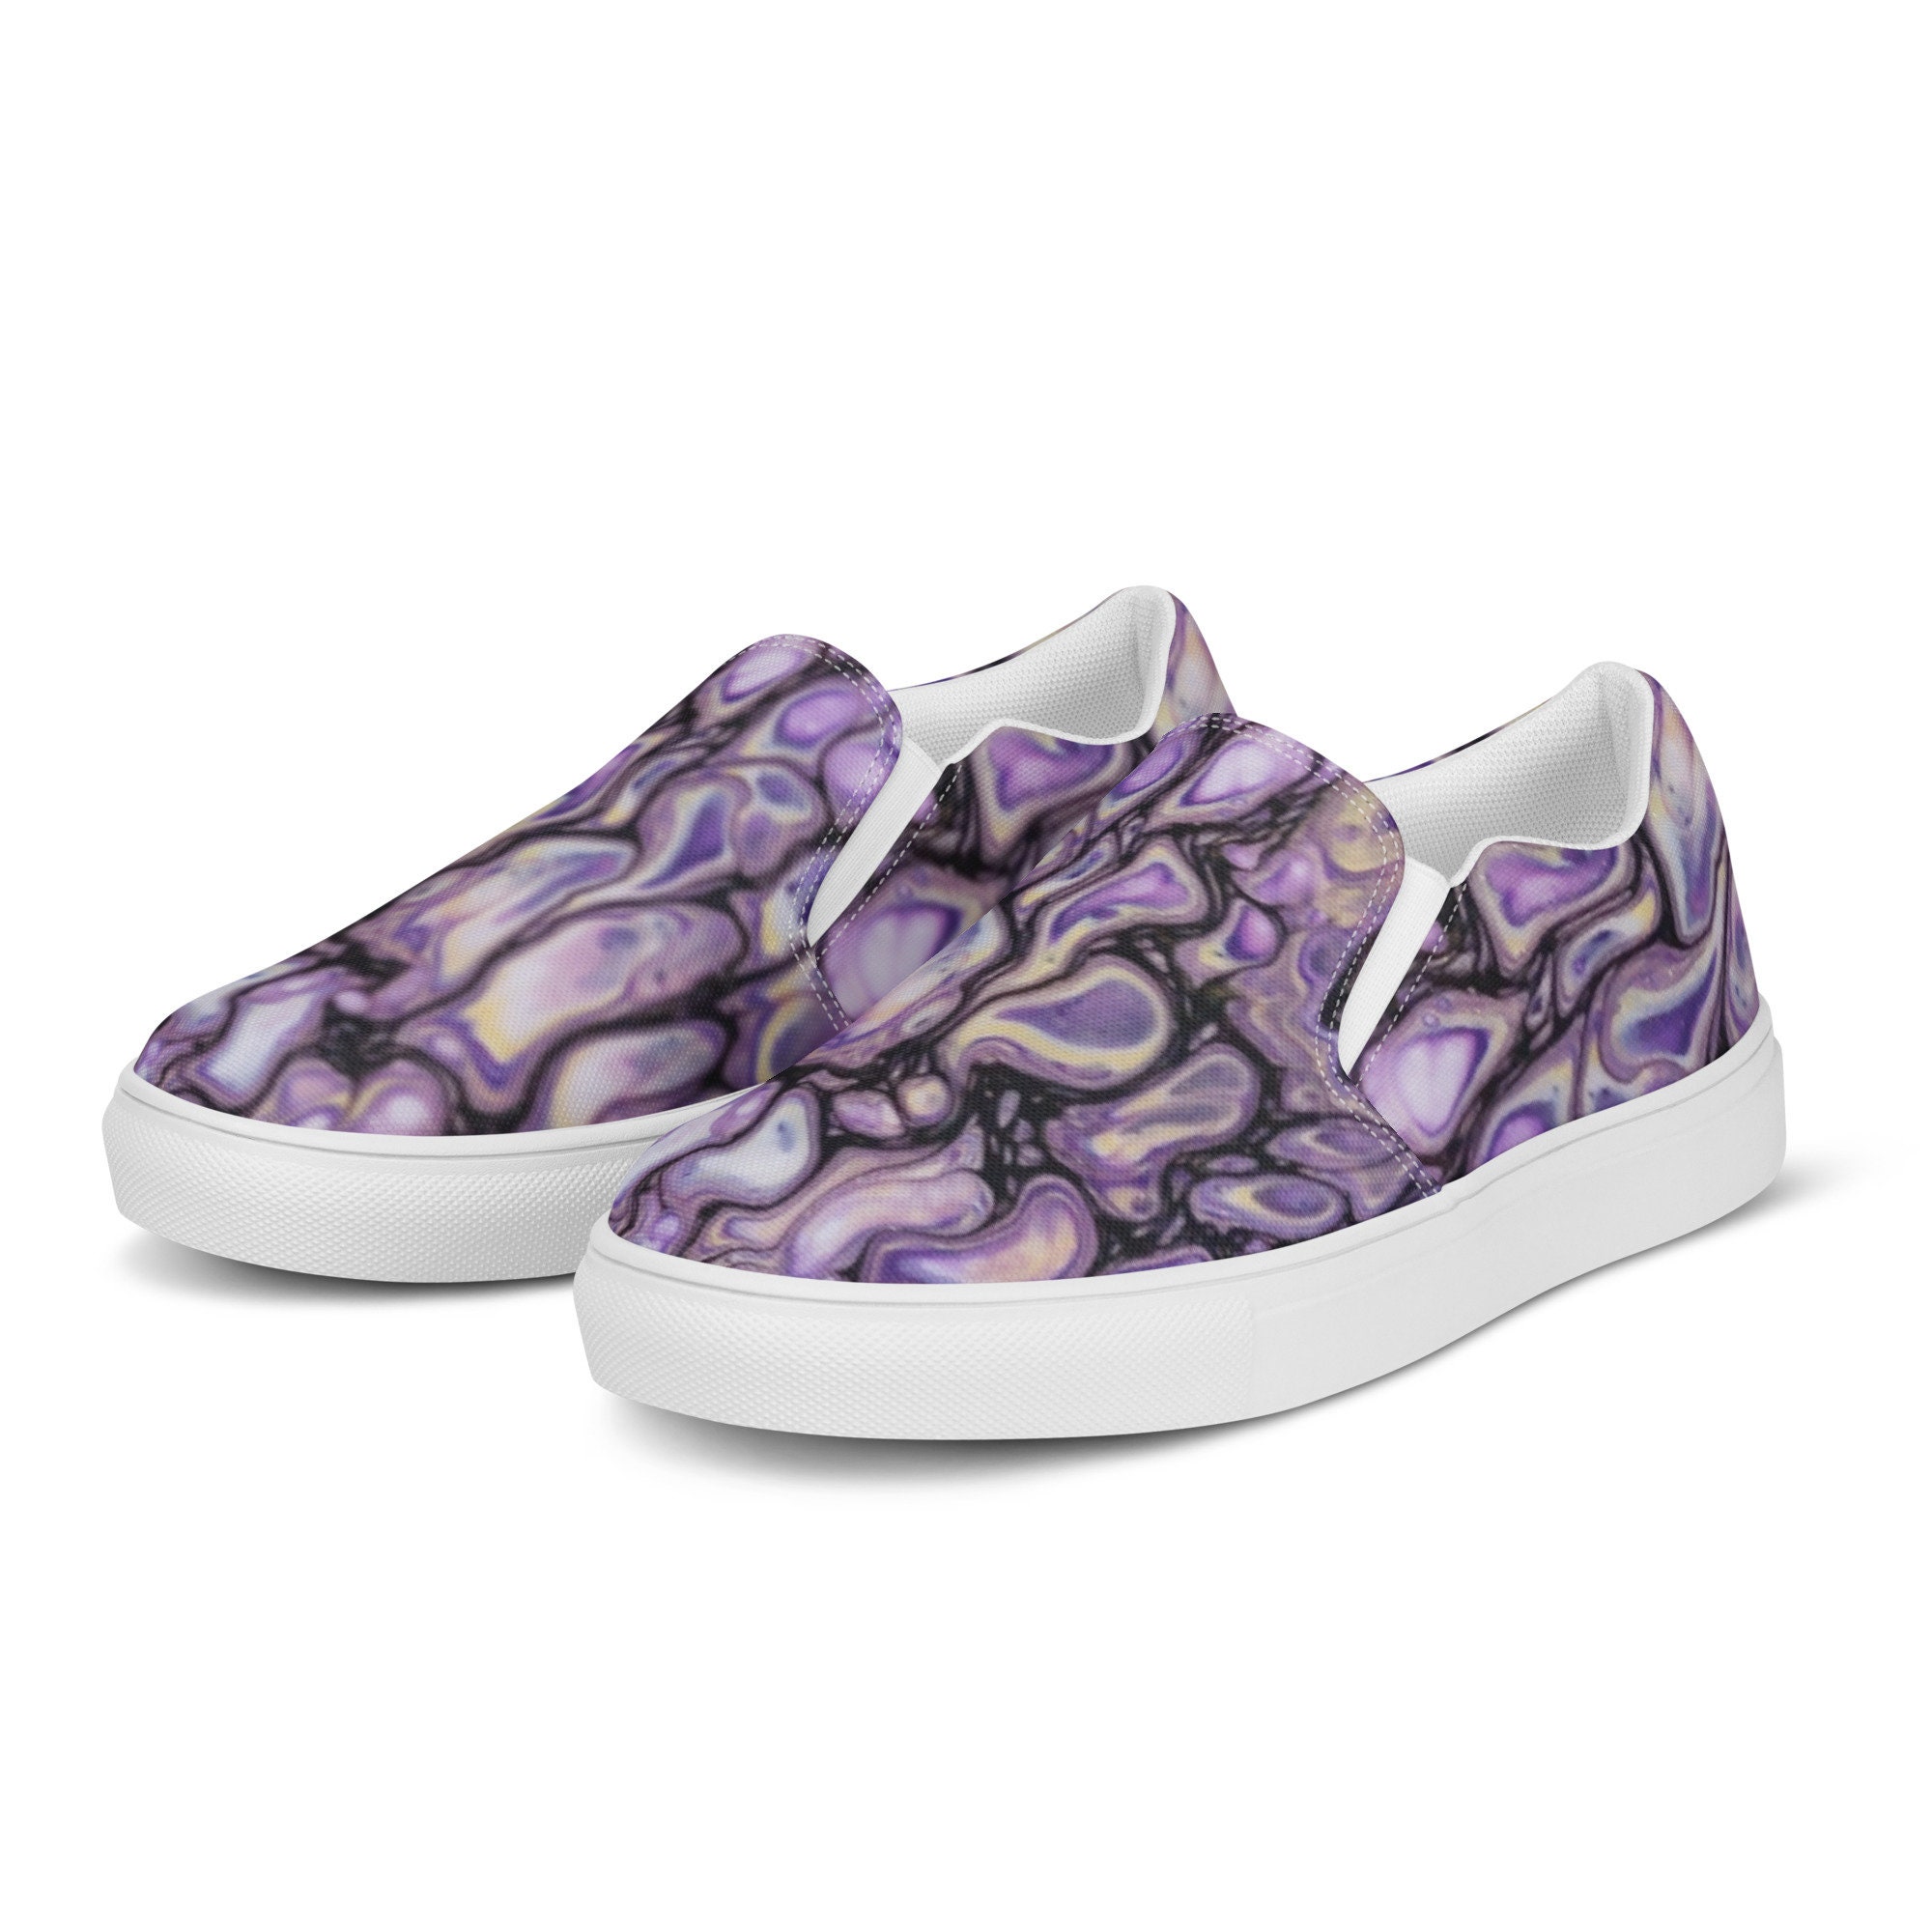 Discover Fluid Art, Abstract Art Casual Slip On Shoes